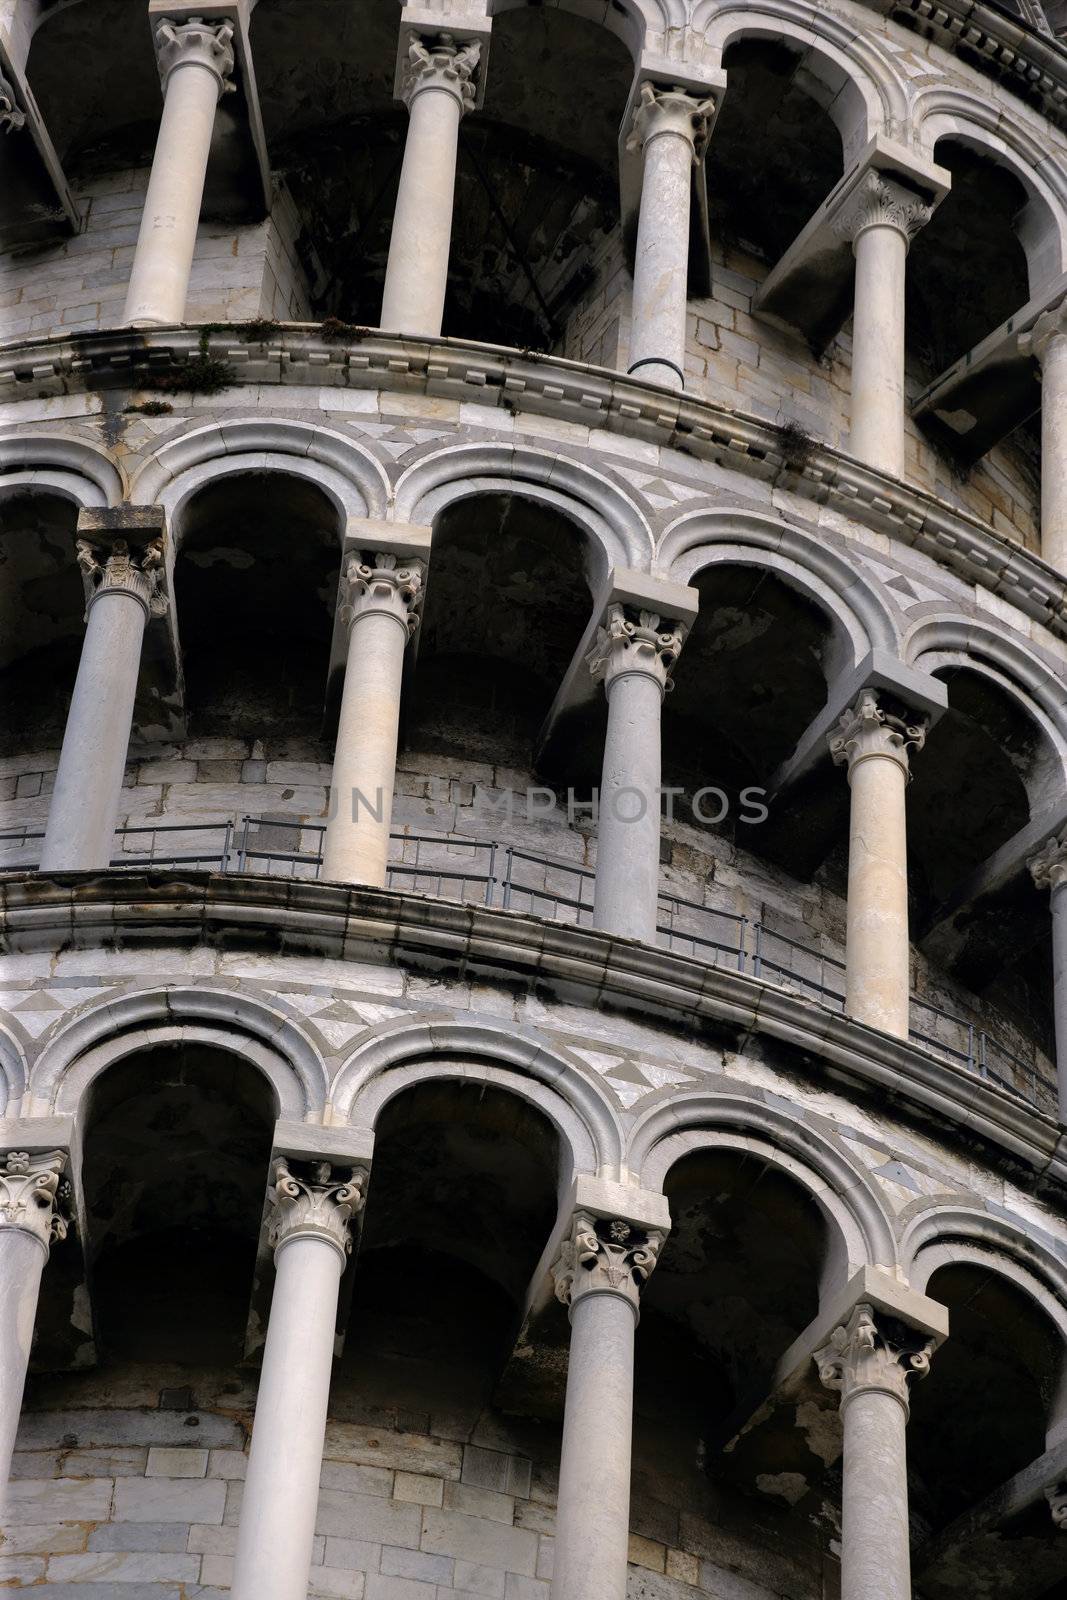 Arches of the Leaning Tower of Pisa by sumners